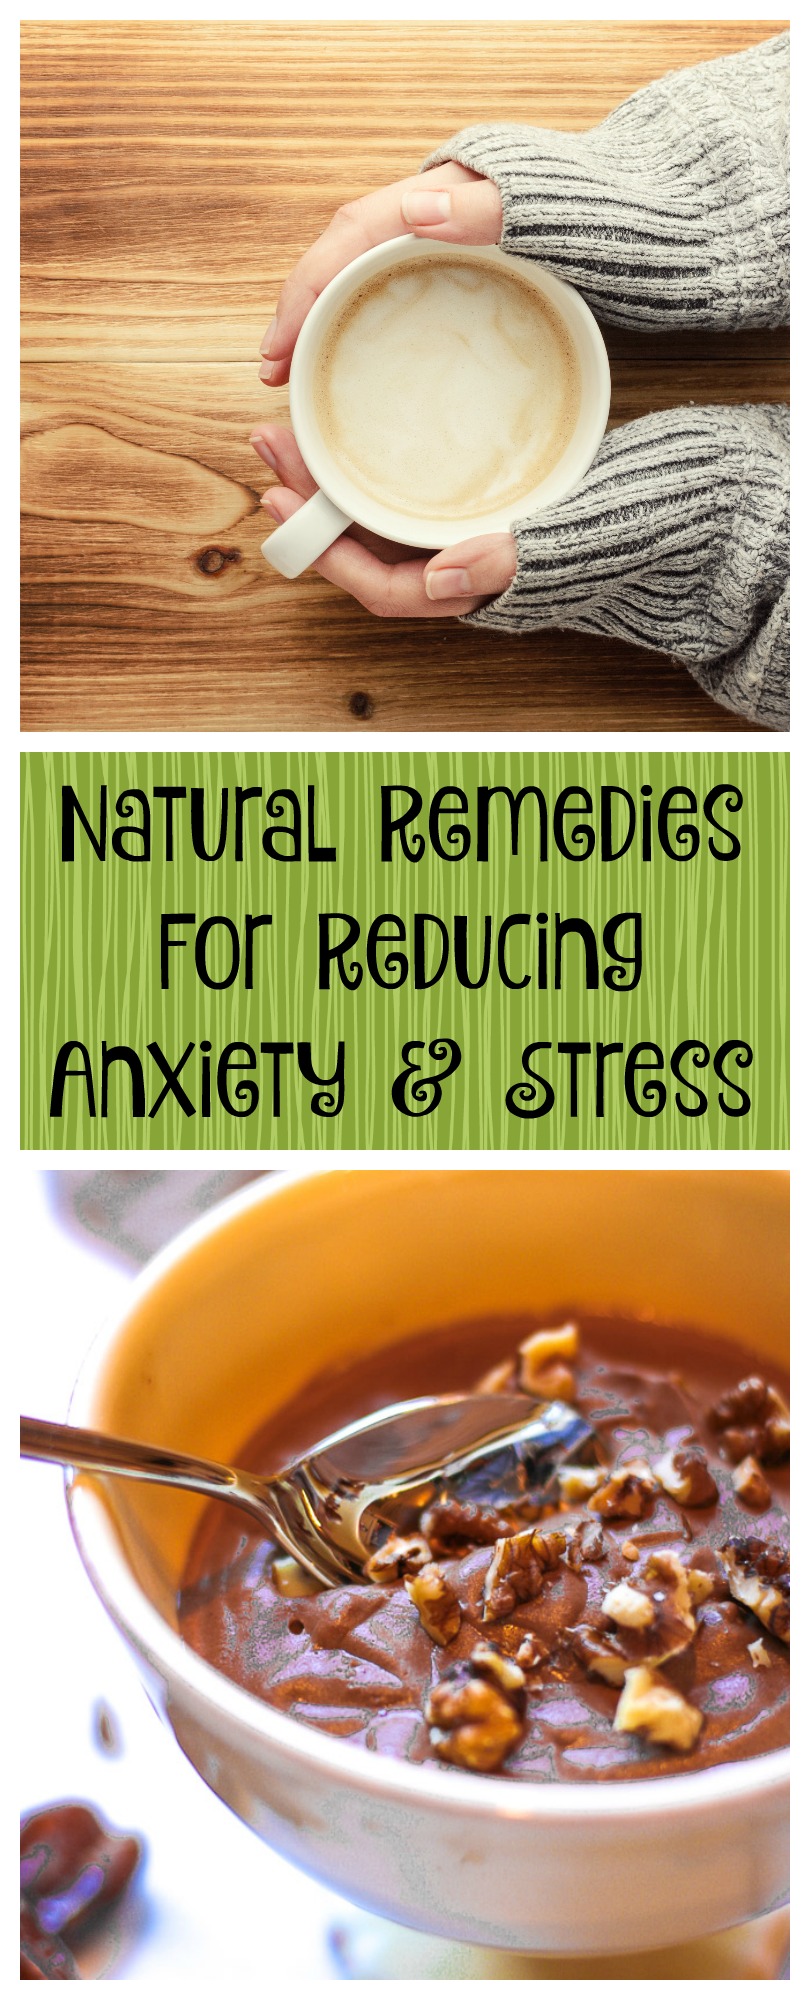 natural remedies for reducing anxiety and stress